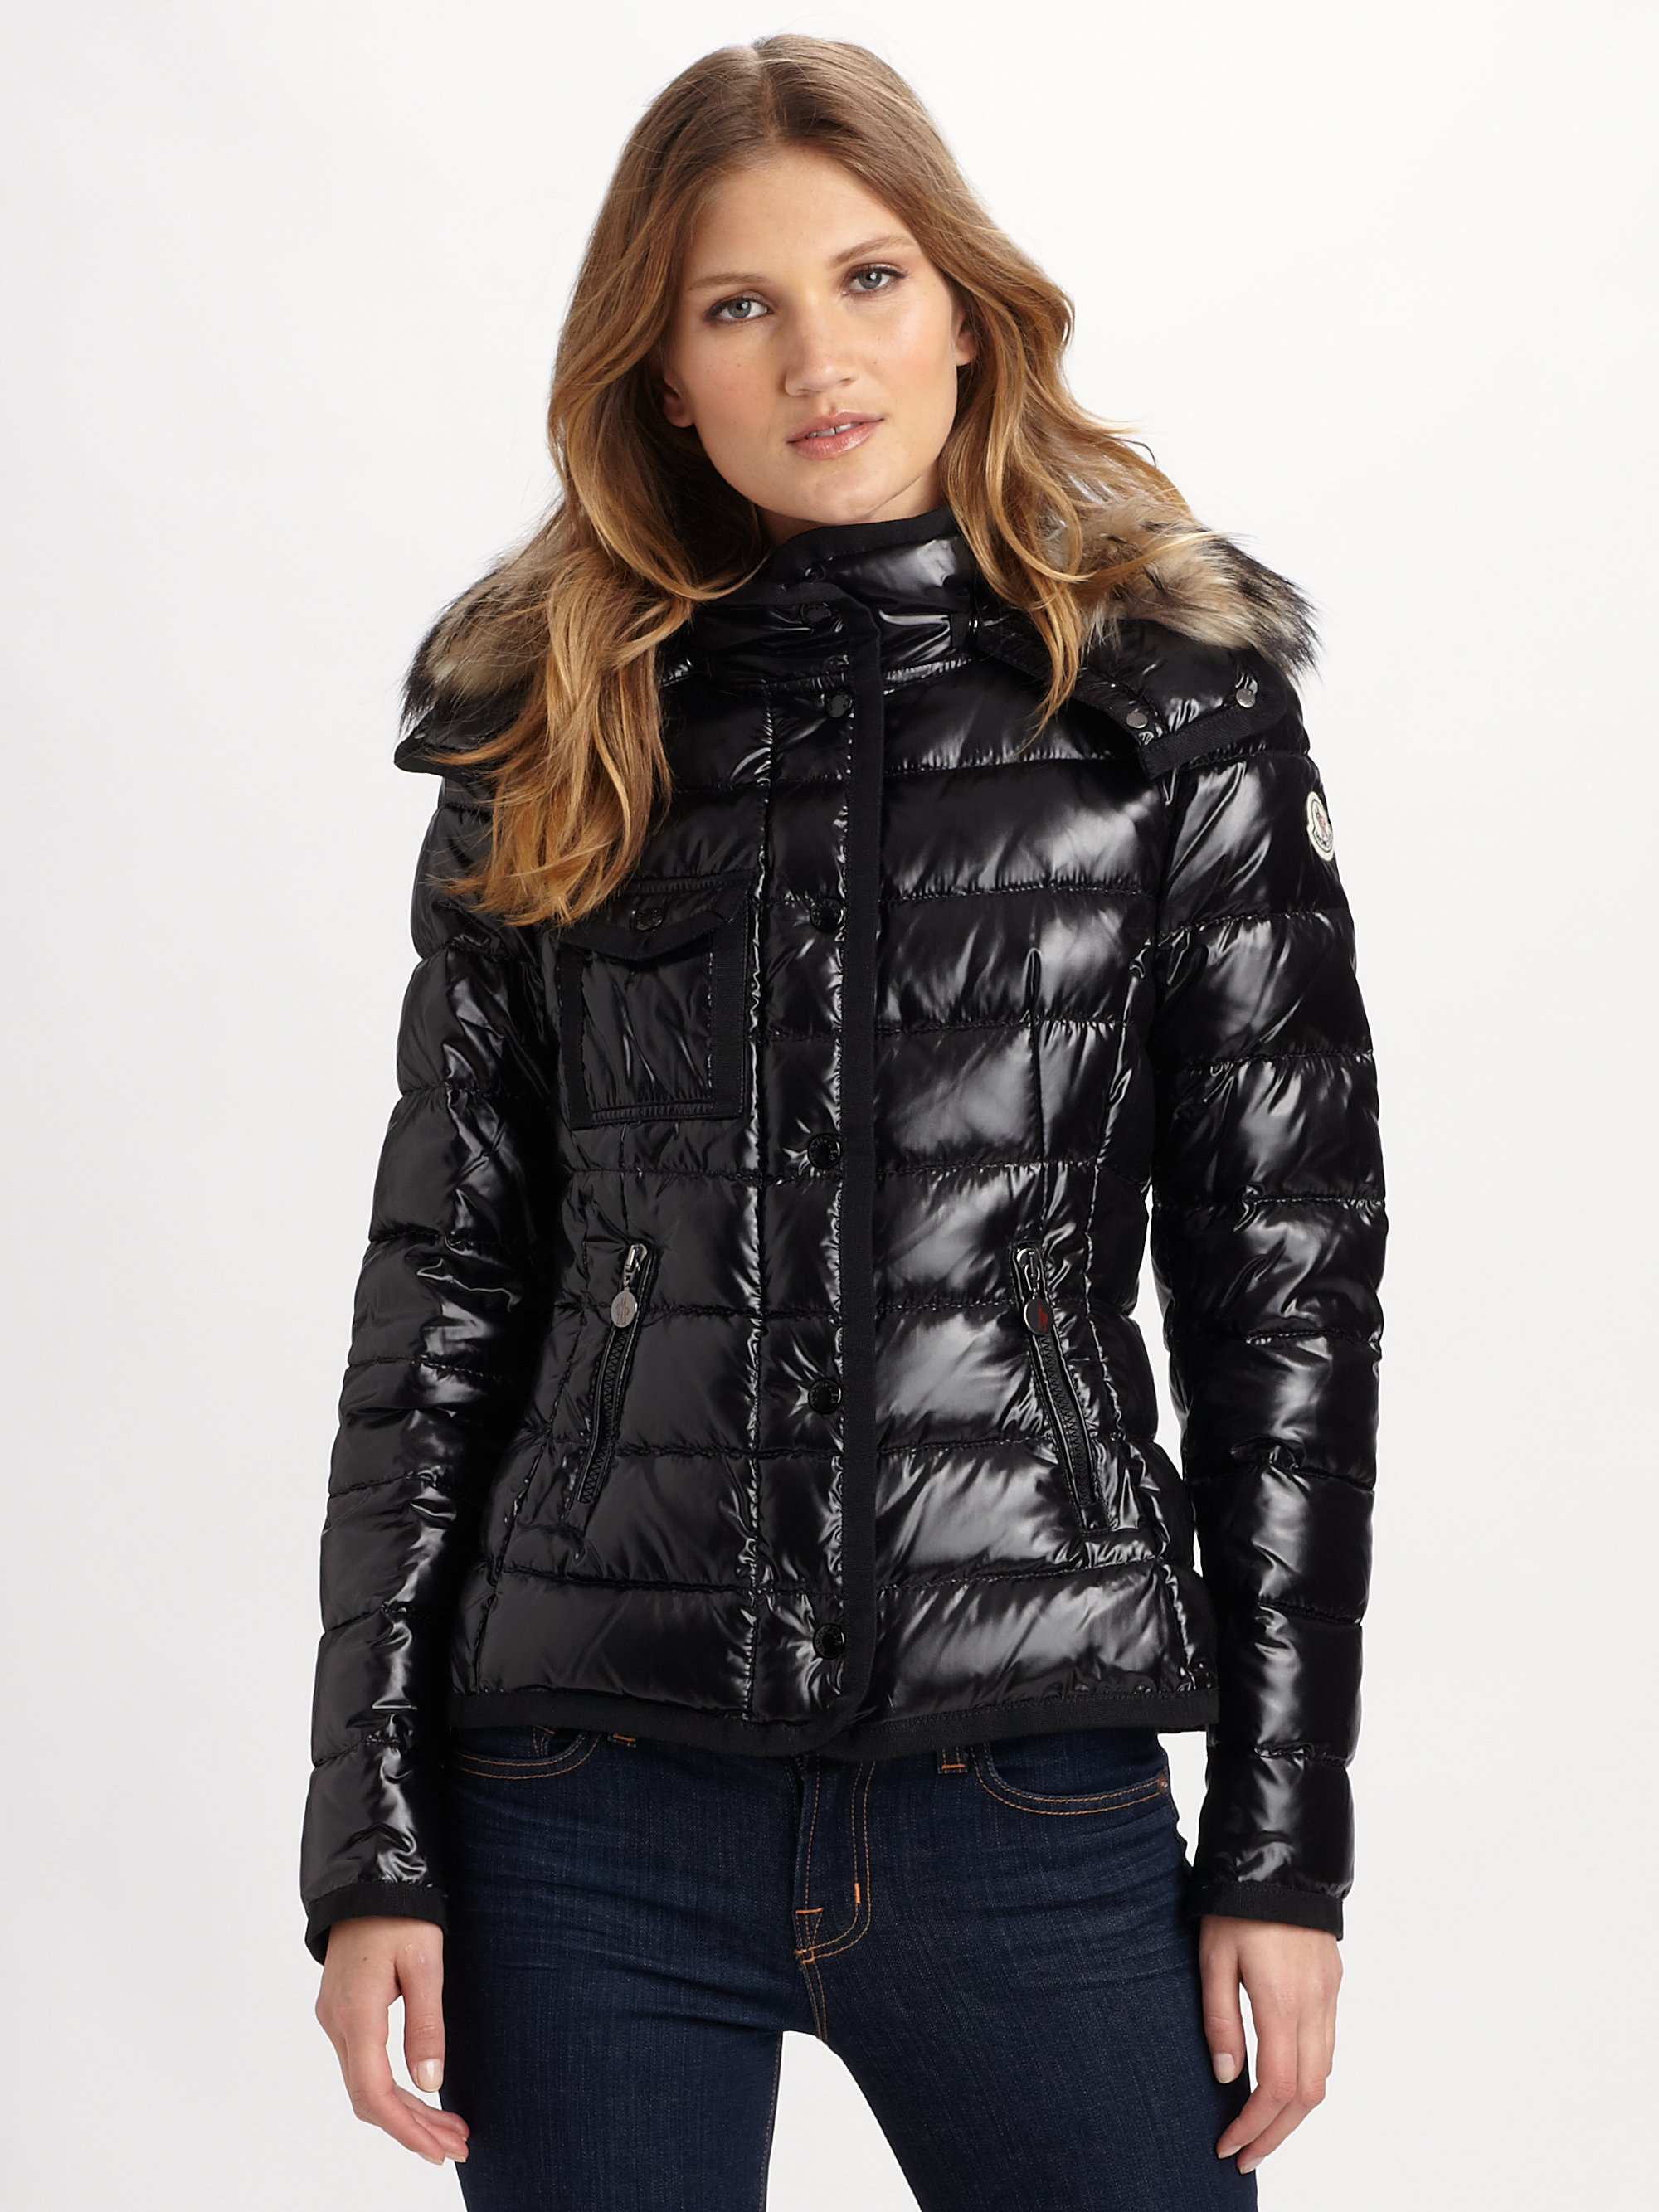 Lyst - Moncler Armoise Fur-trimmed Puffer Jacket in Black